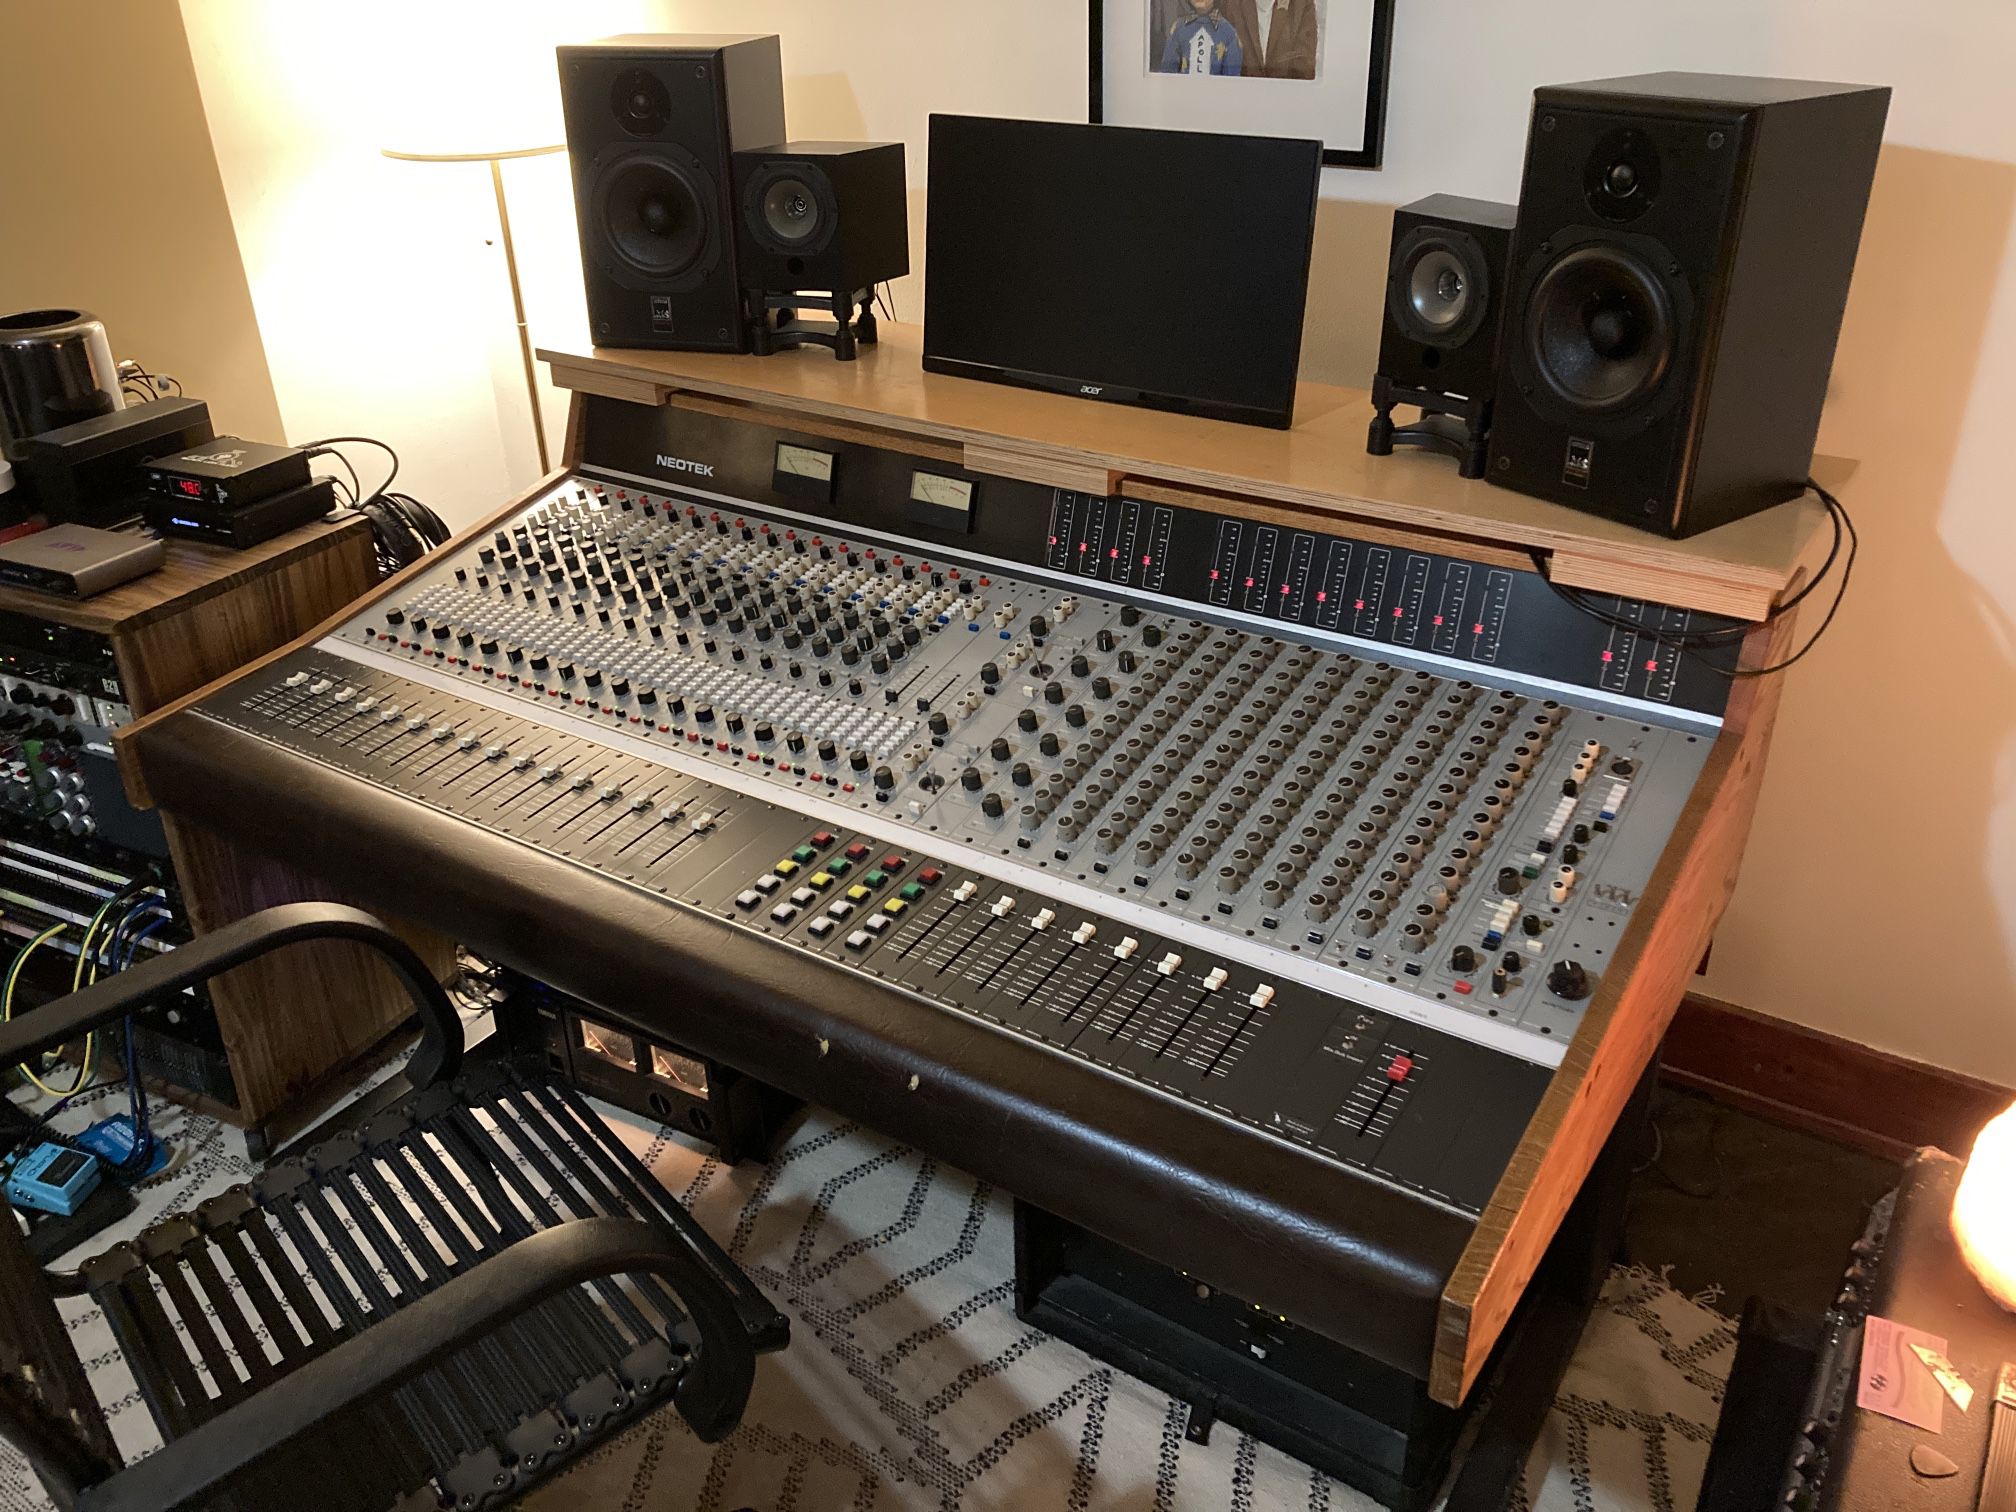 Neotek Series 1 16 Channel Theater Console Sale in Highland Park, CA - OfferUp